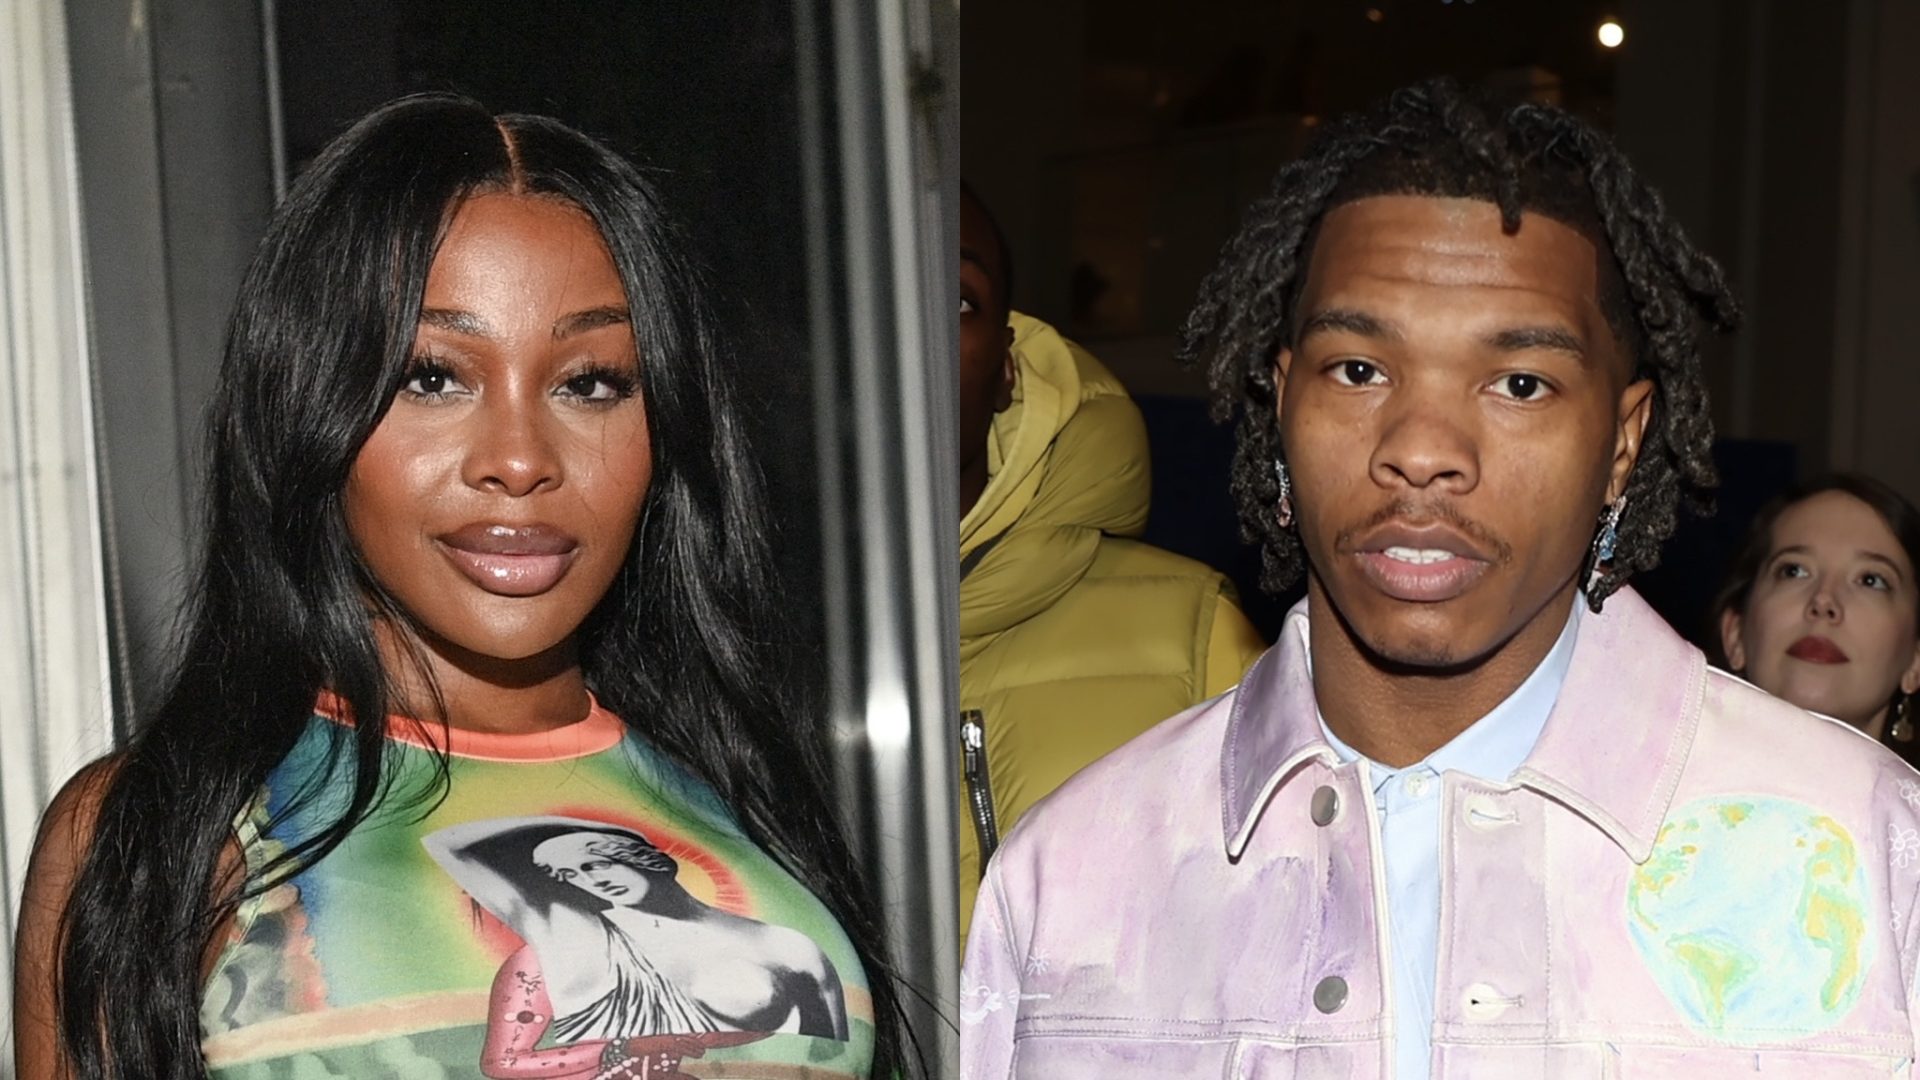 Oop! Jayda Cheaves Speaks Out After She & Lil Baby Are Spotted Out Together (Video) thumbnail